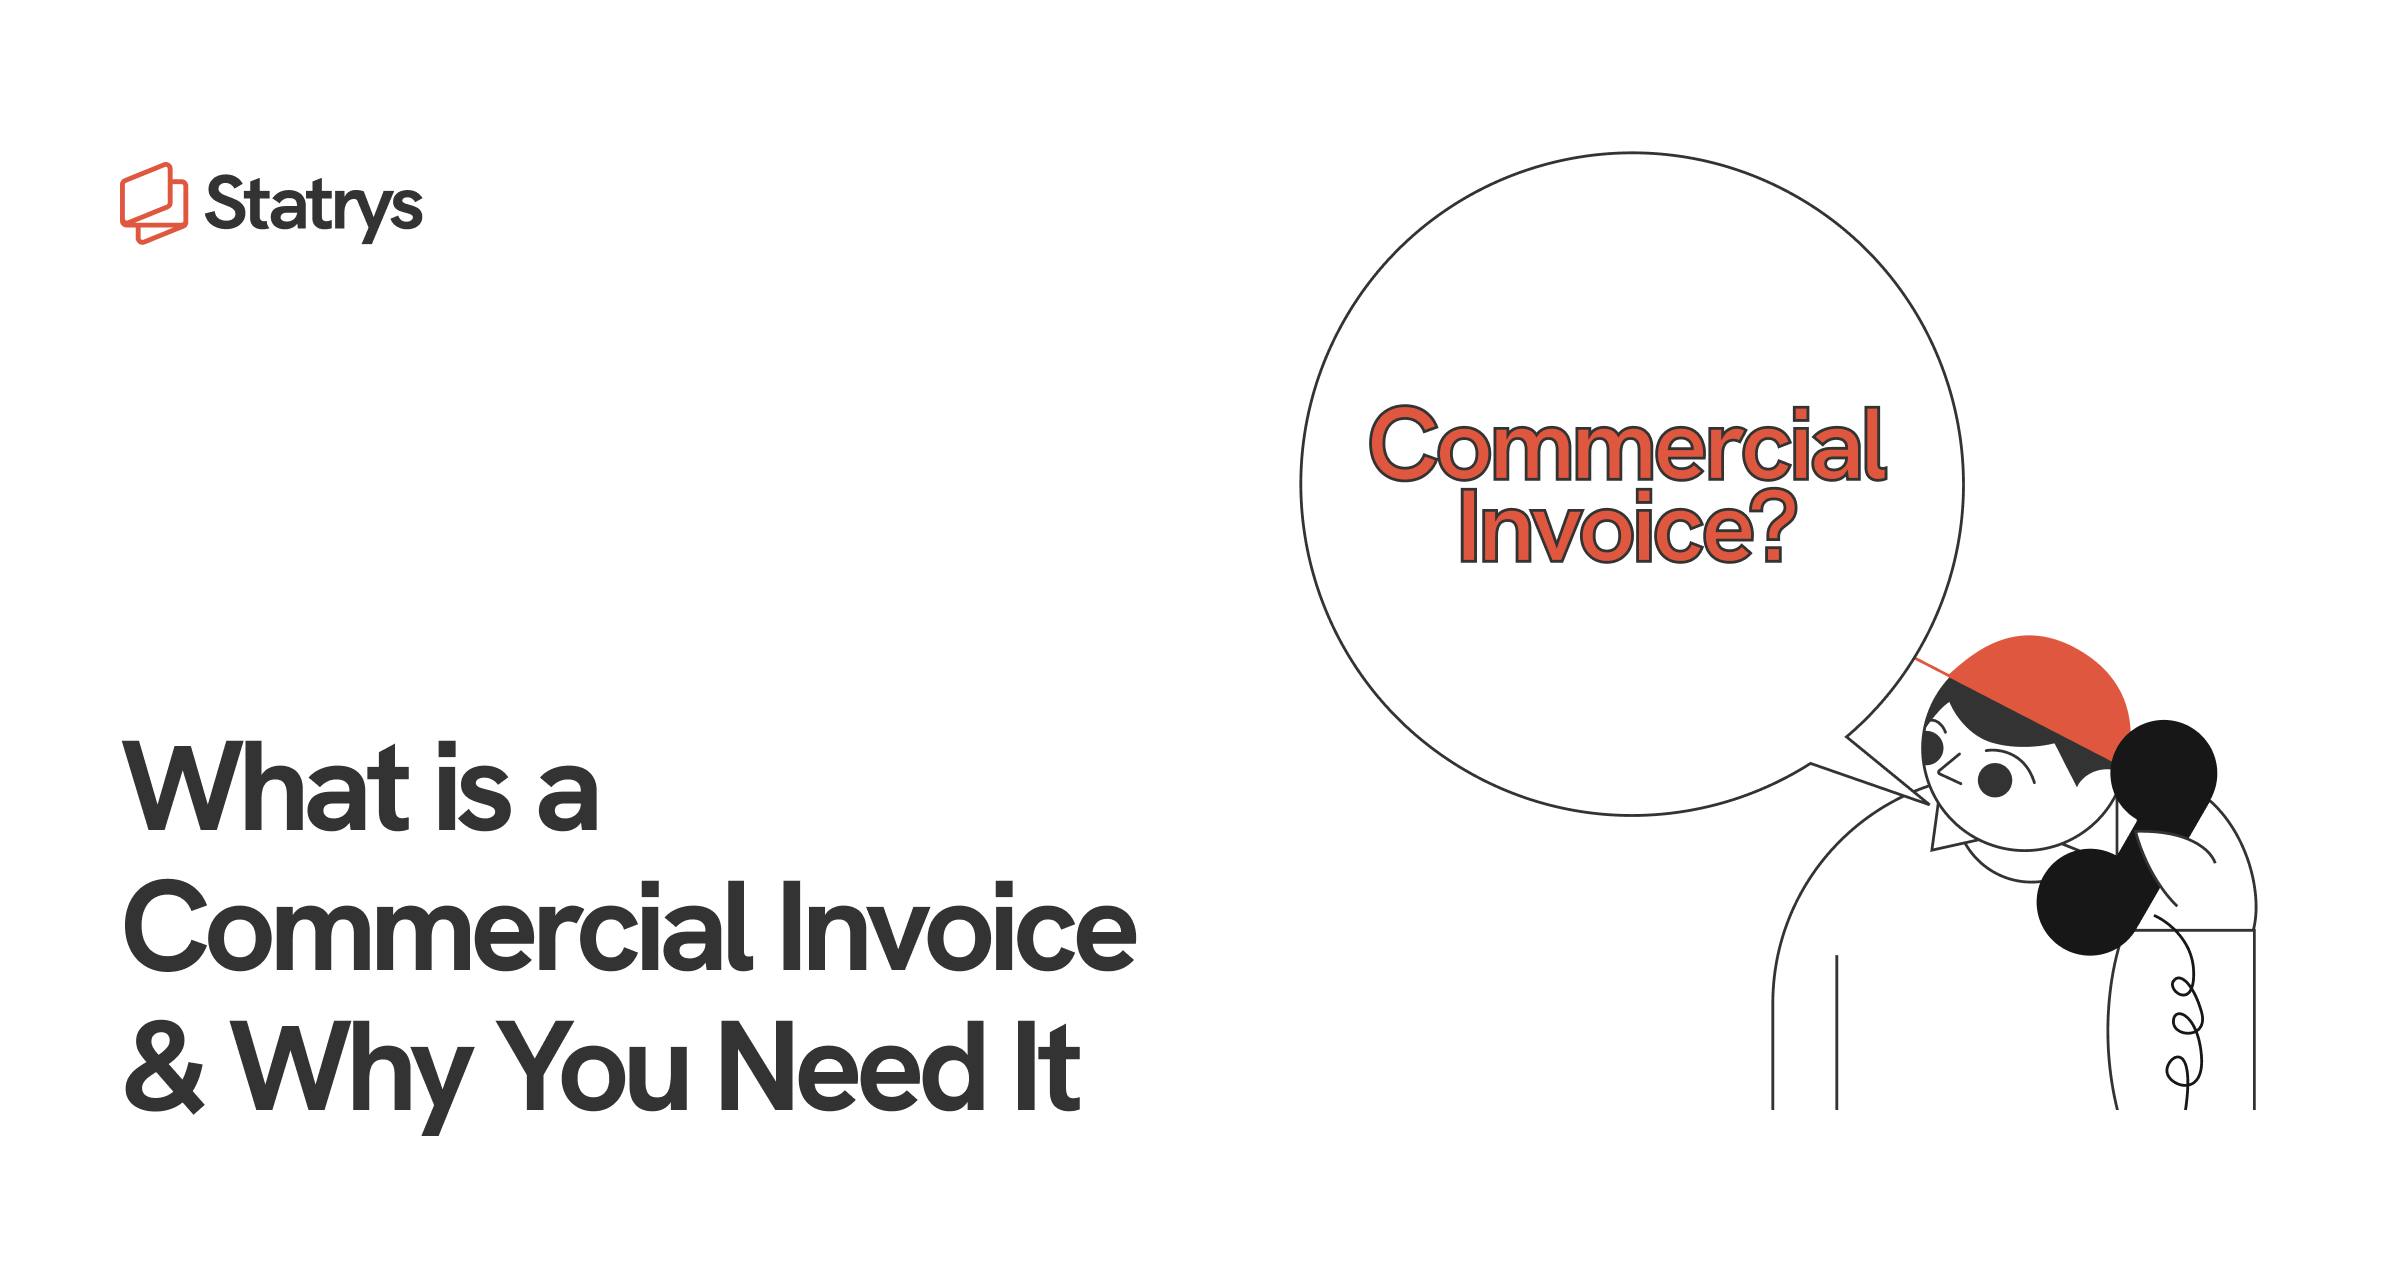 Commercial invoice: What it is and why you need it.